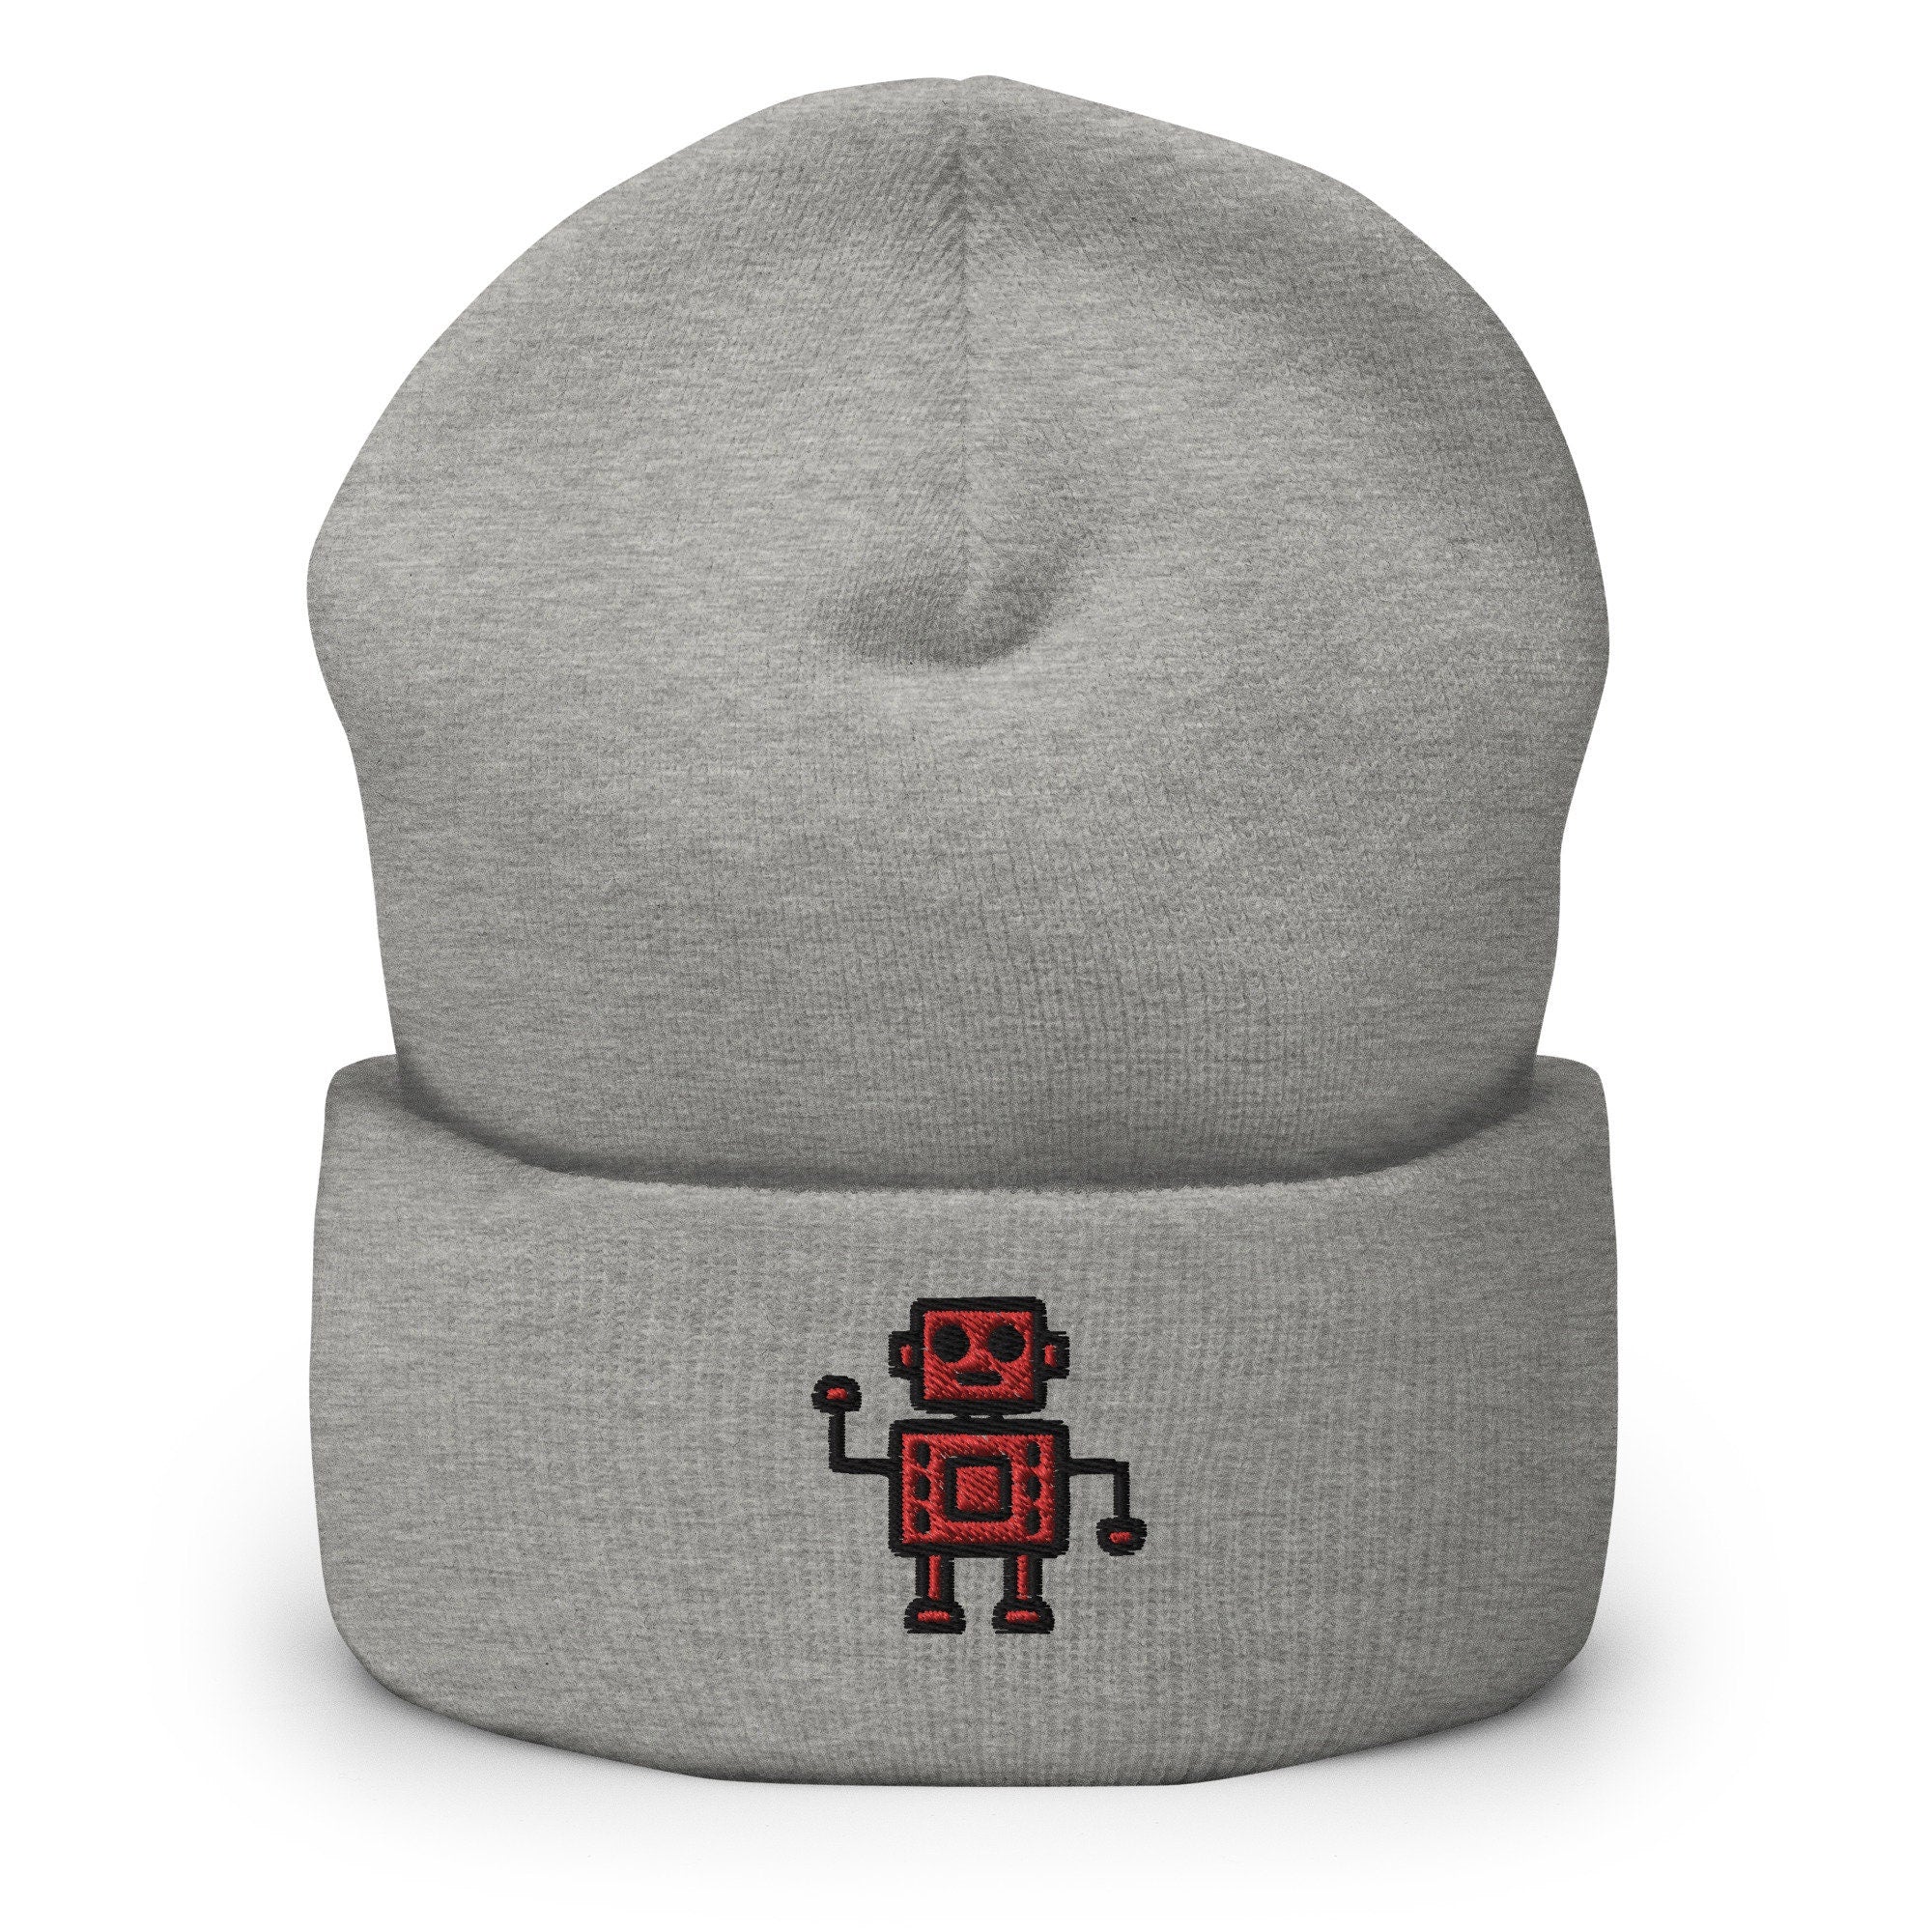 Vintage Retro Robot Embroidered Beanie, Handmade Cuffed Knit Unisex Slouchy Adult Winter Hat Cap Gift